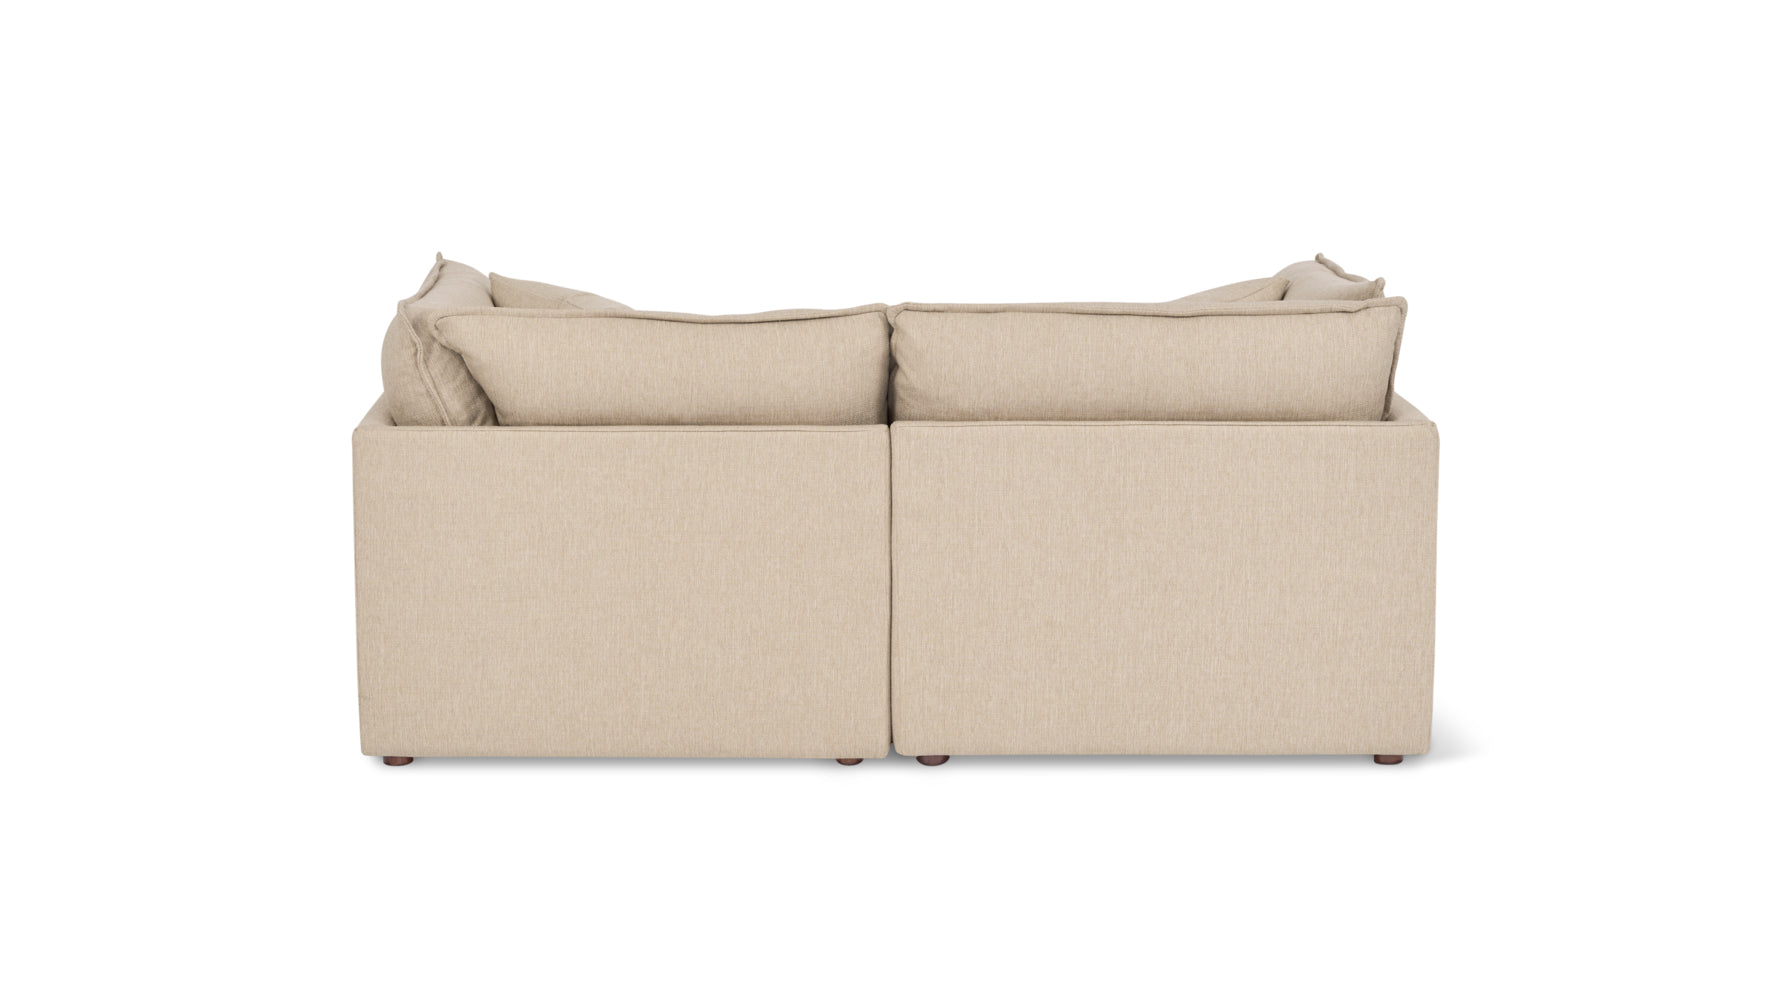 Chill Time 3-Piece Modular Sectional, Biscuit - Image 4